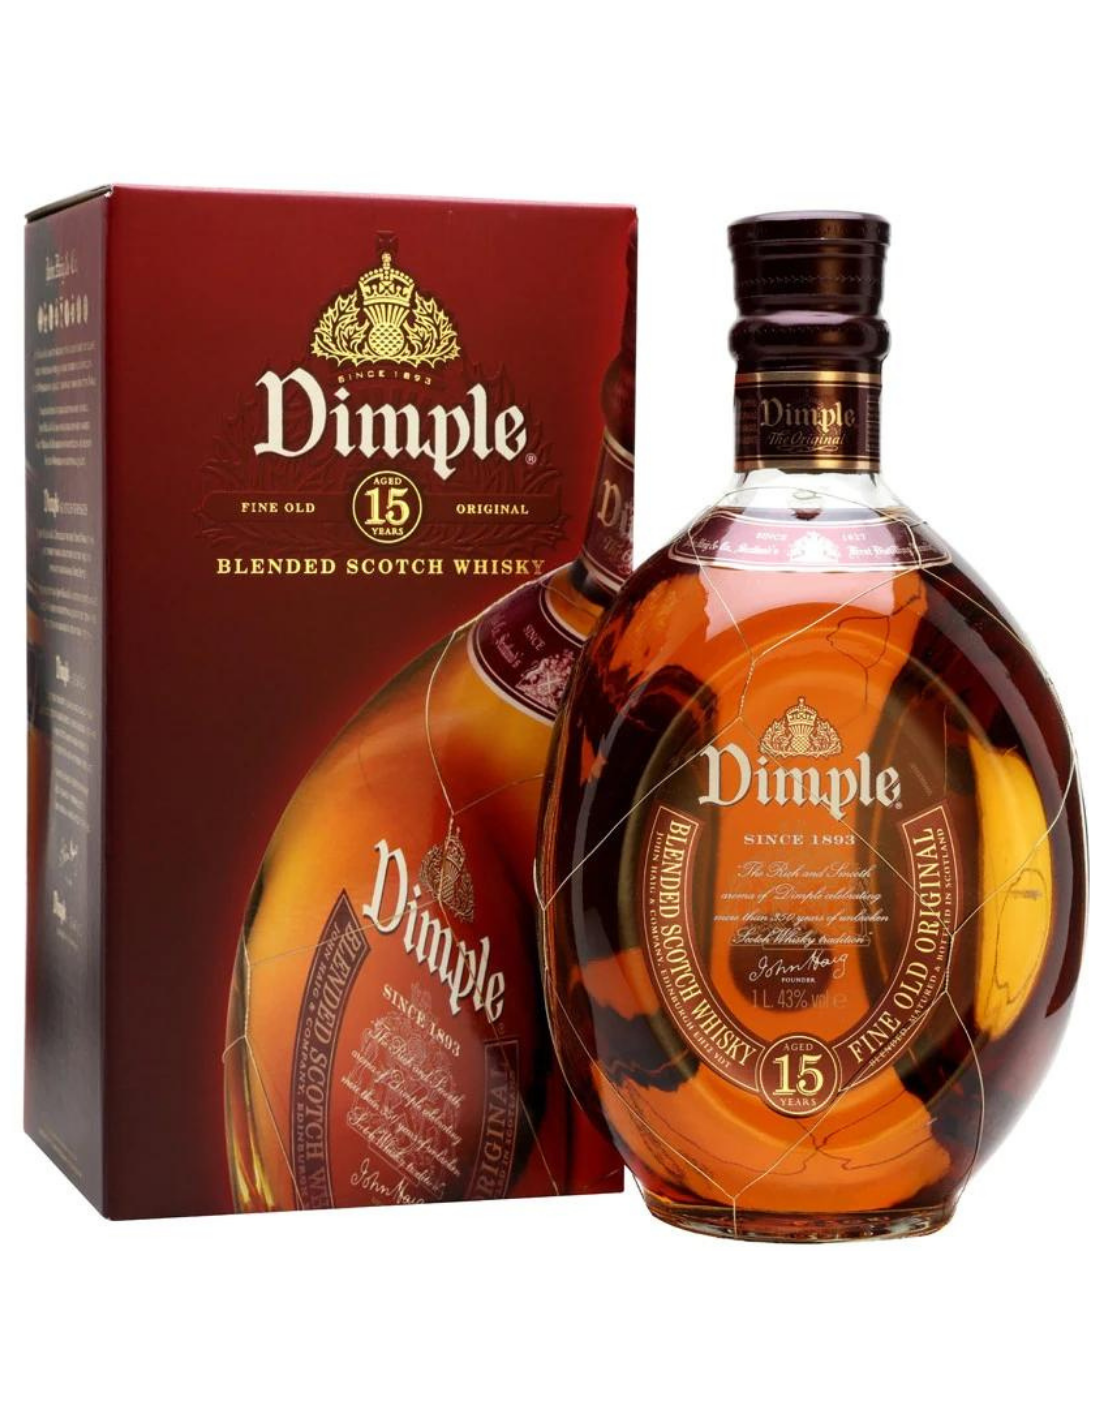 Whisky Dimple, 1L, 15 ani, 43% alc., Scotia alcooldiscount.ro